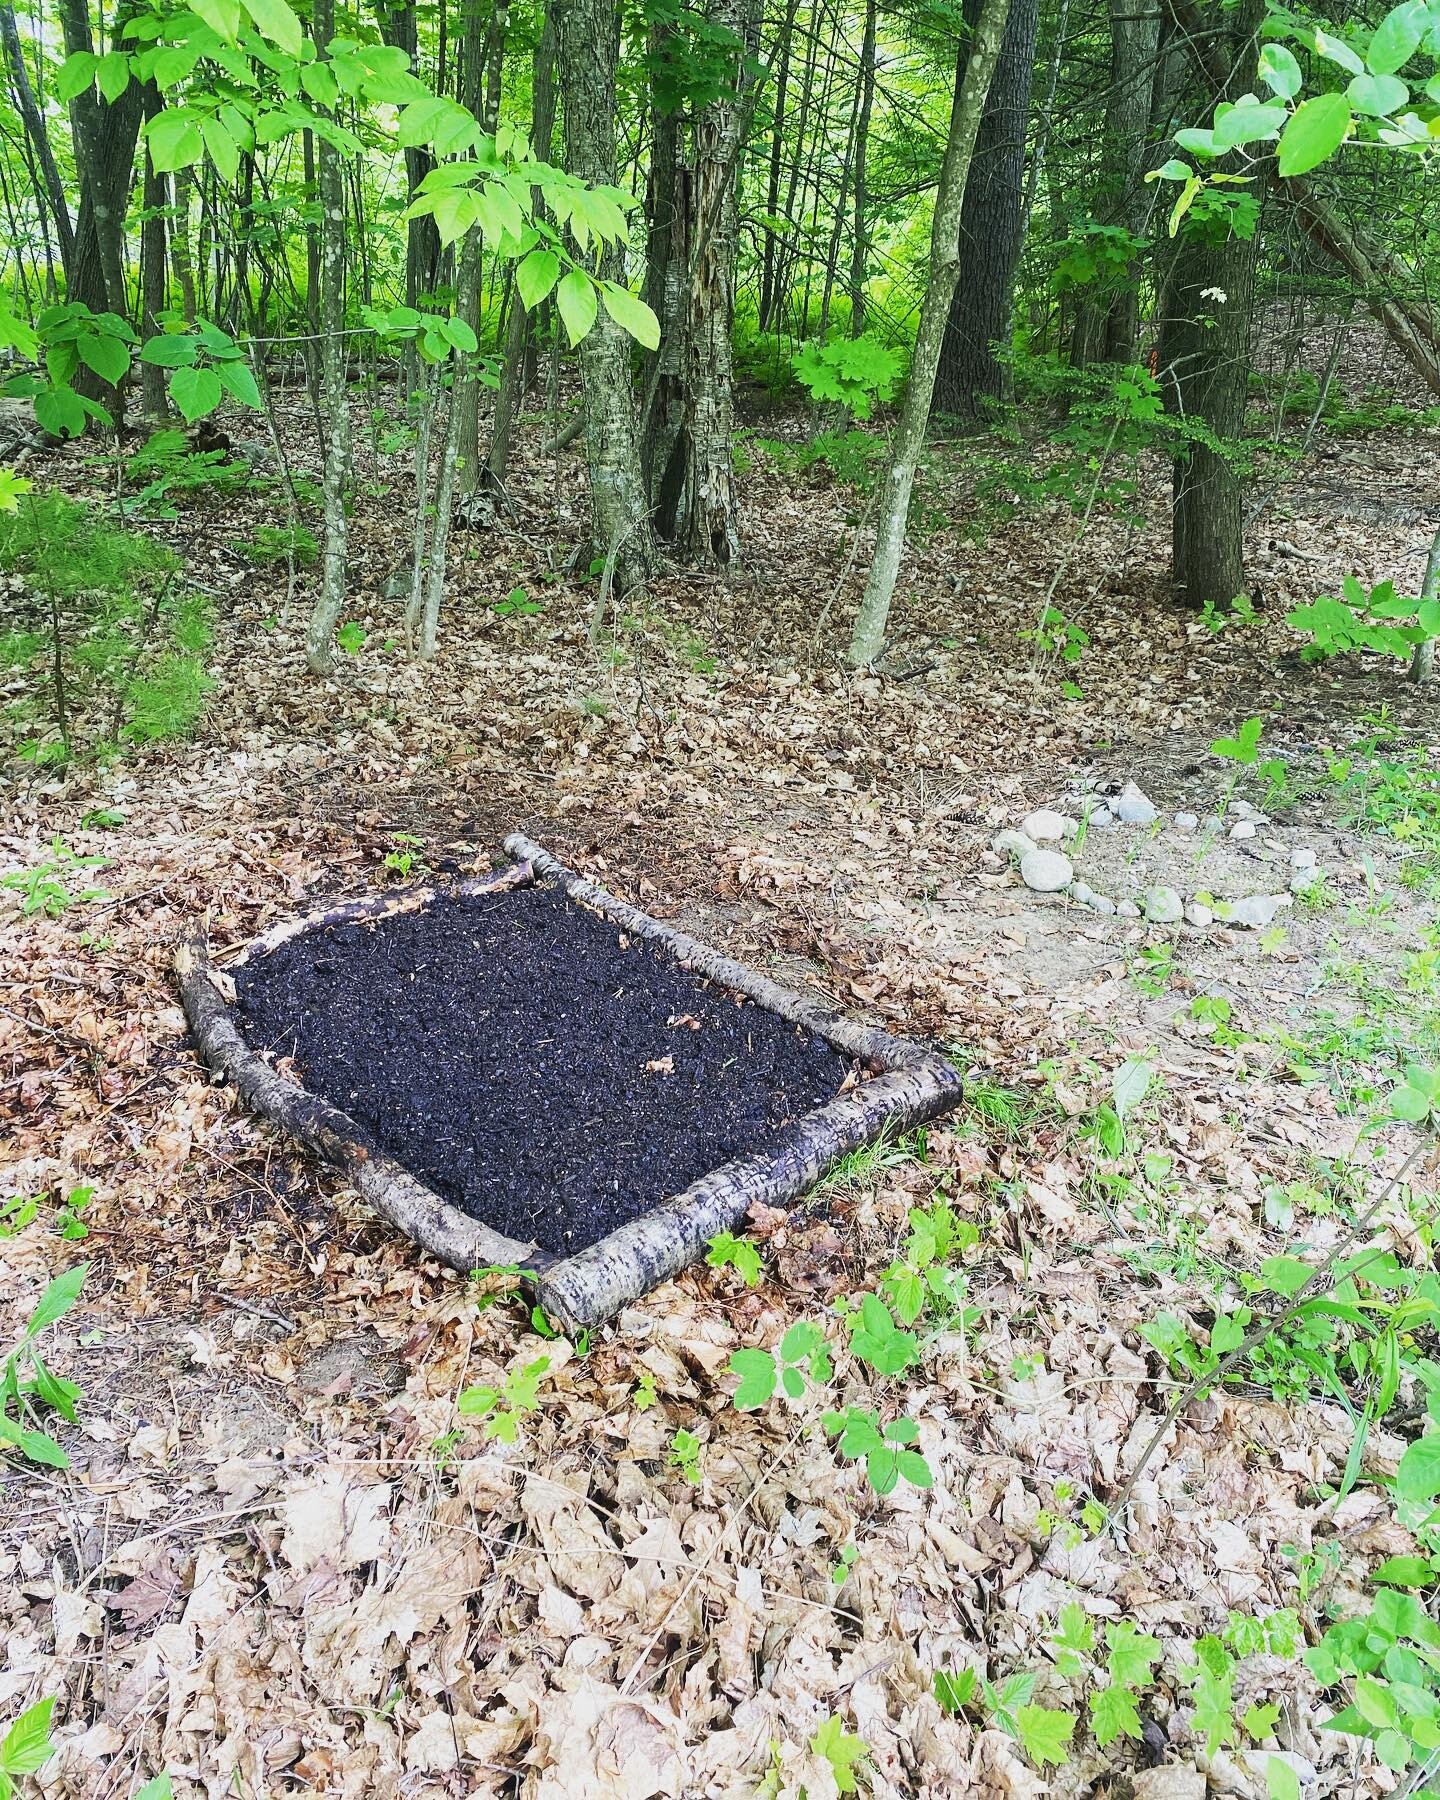 Planted our first mushrooms today in the woods! Thank you @northsporemushrooms for the substrate and manure. 
.
Also, see pic 2 for what 600 pounds of topsoil looks like on a lawn. Not much!! Gotta get another 2000 pounds or so to finish! 
#homestead